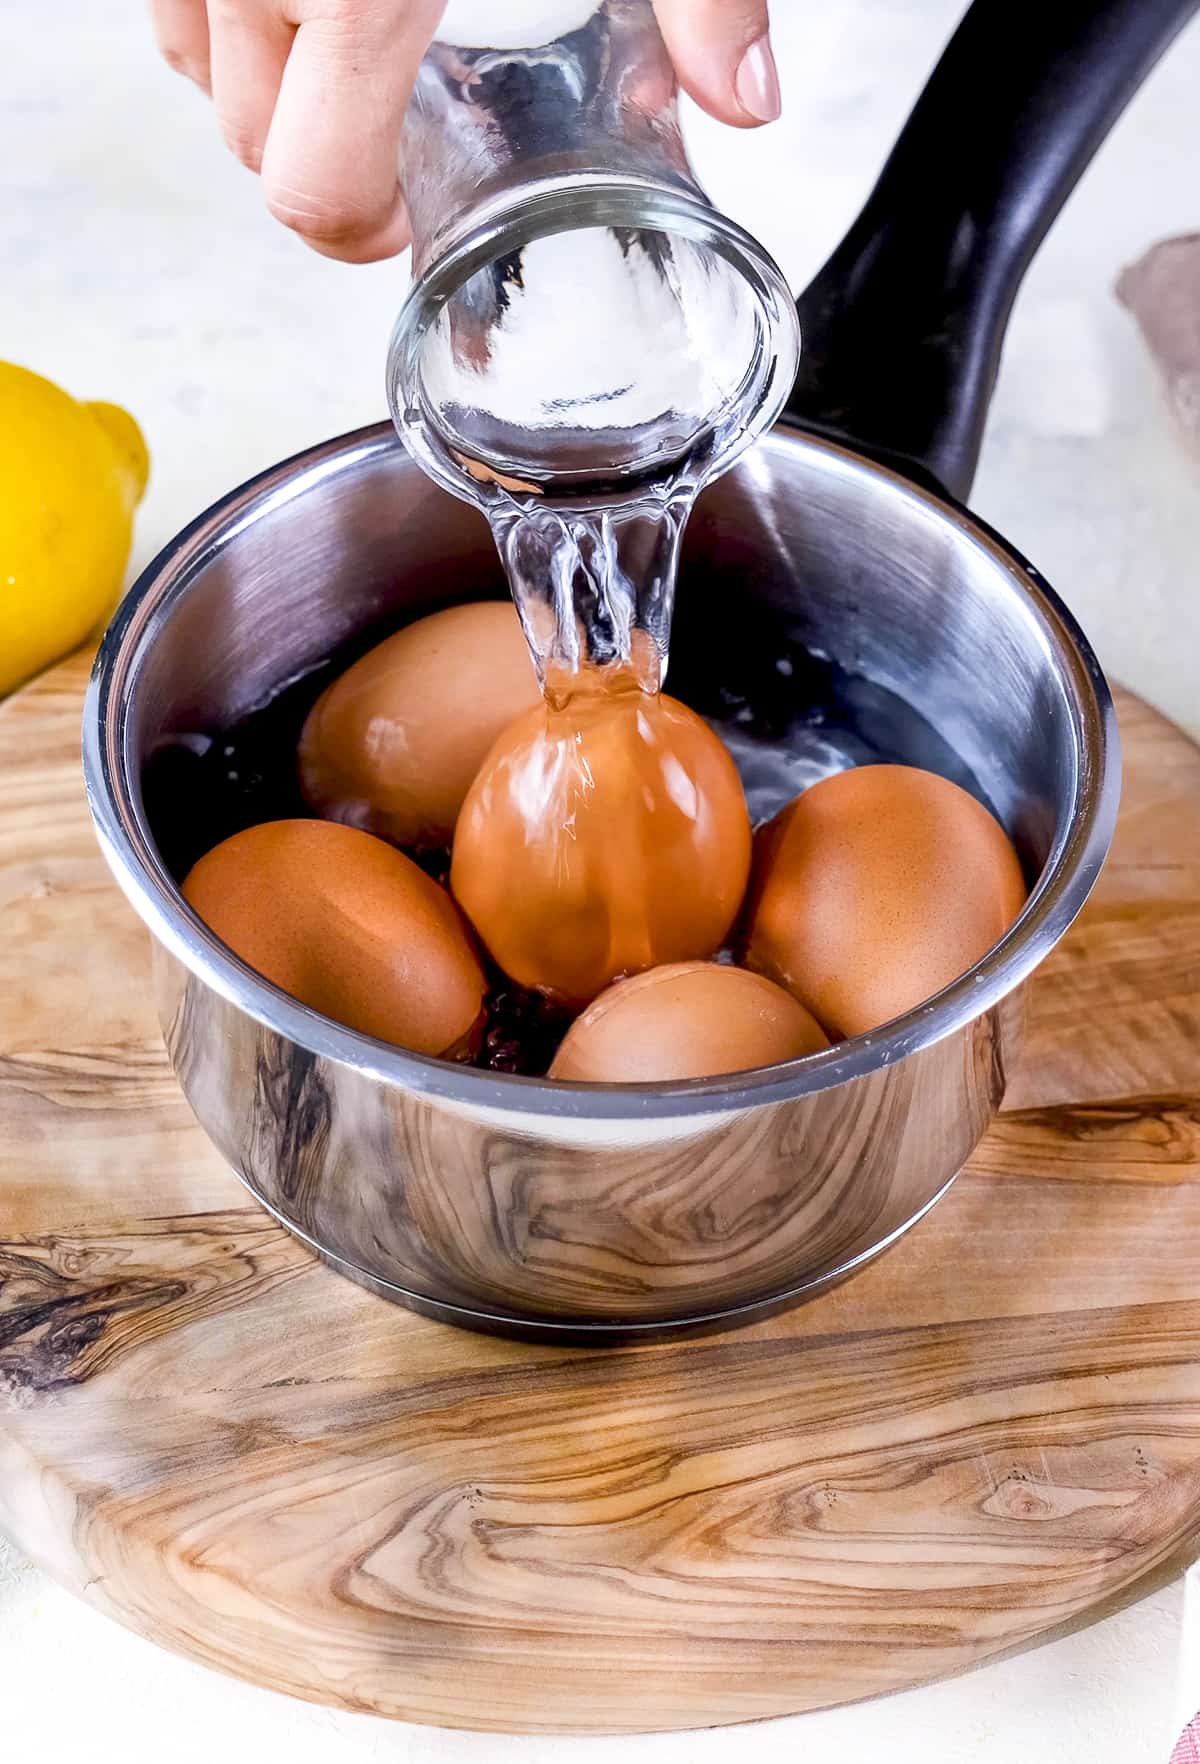 Hand pouring water over the eggs in a saucepan.